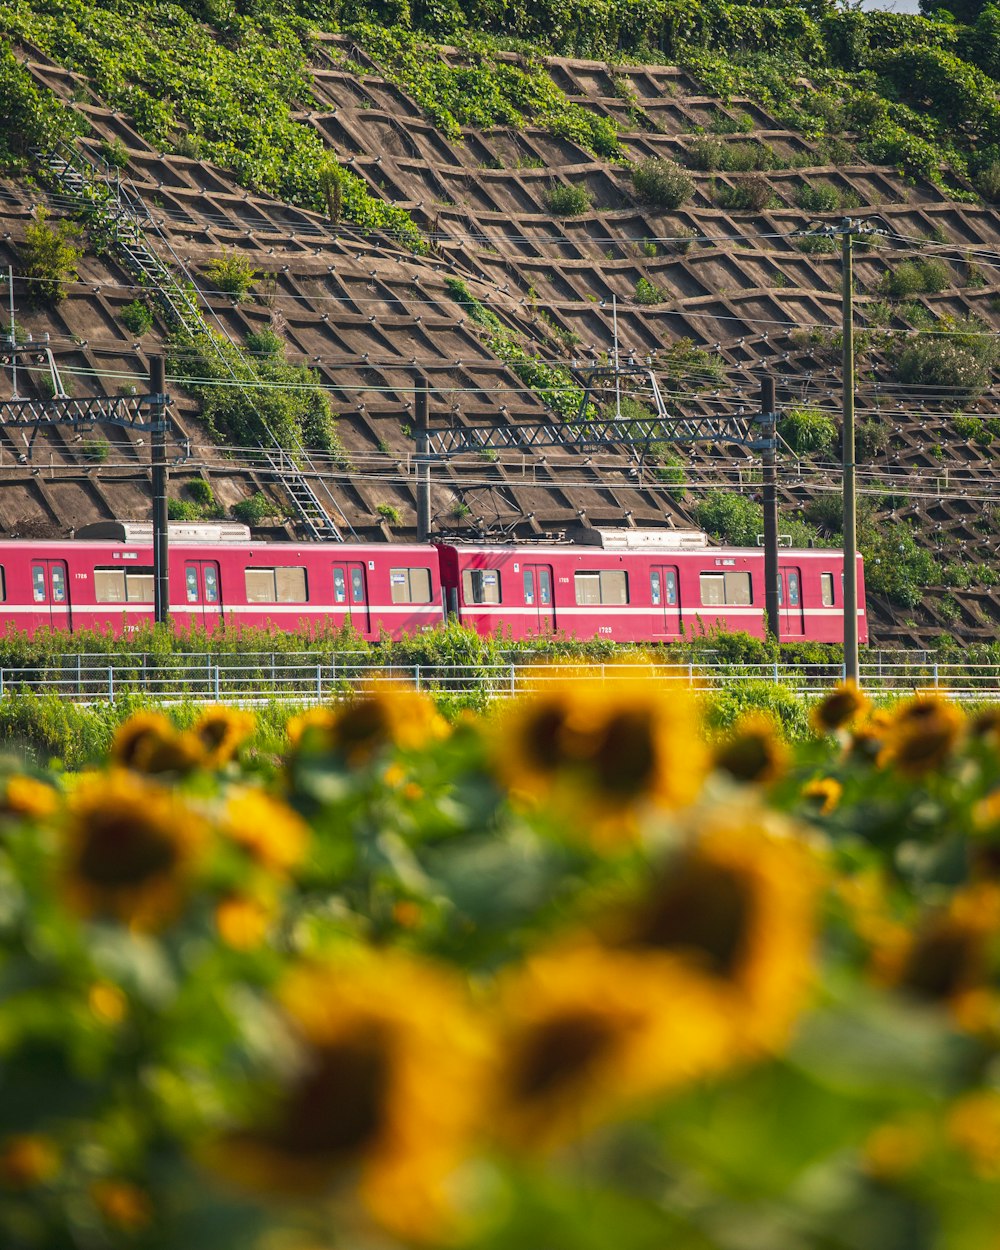 a train going through a field of flowers